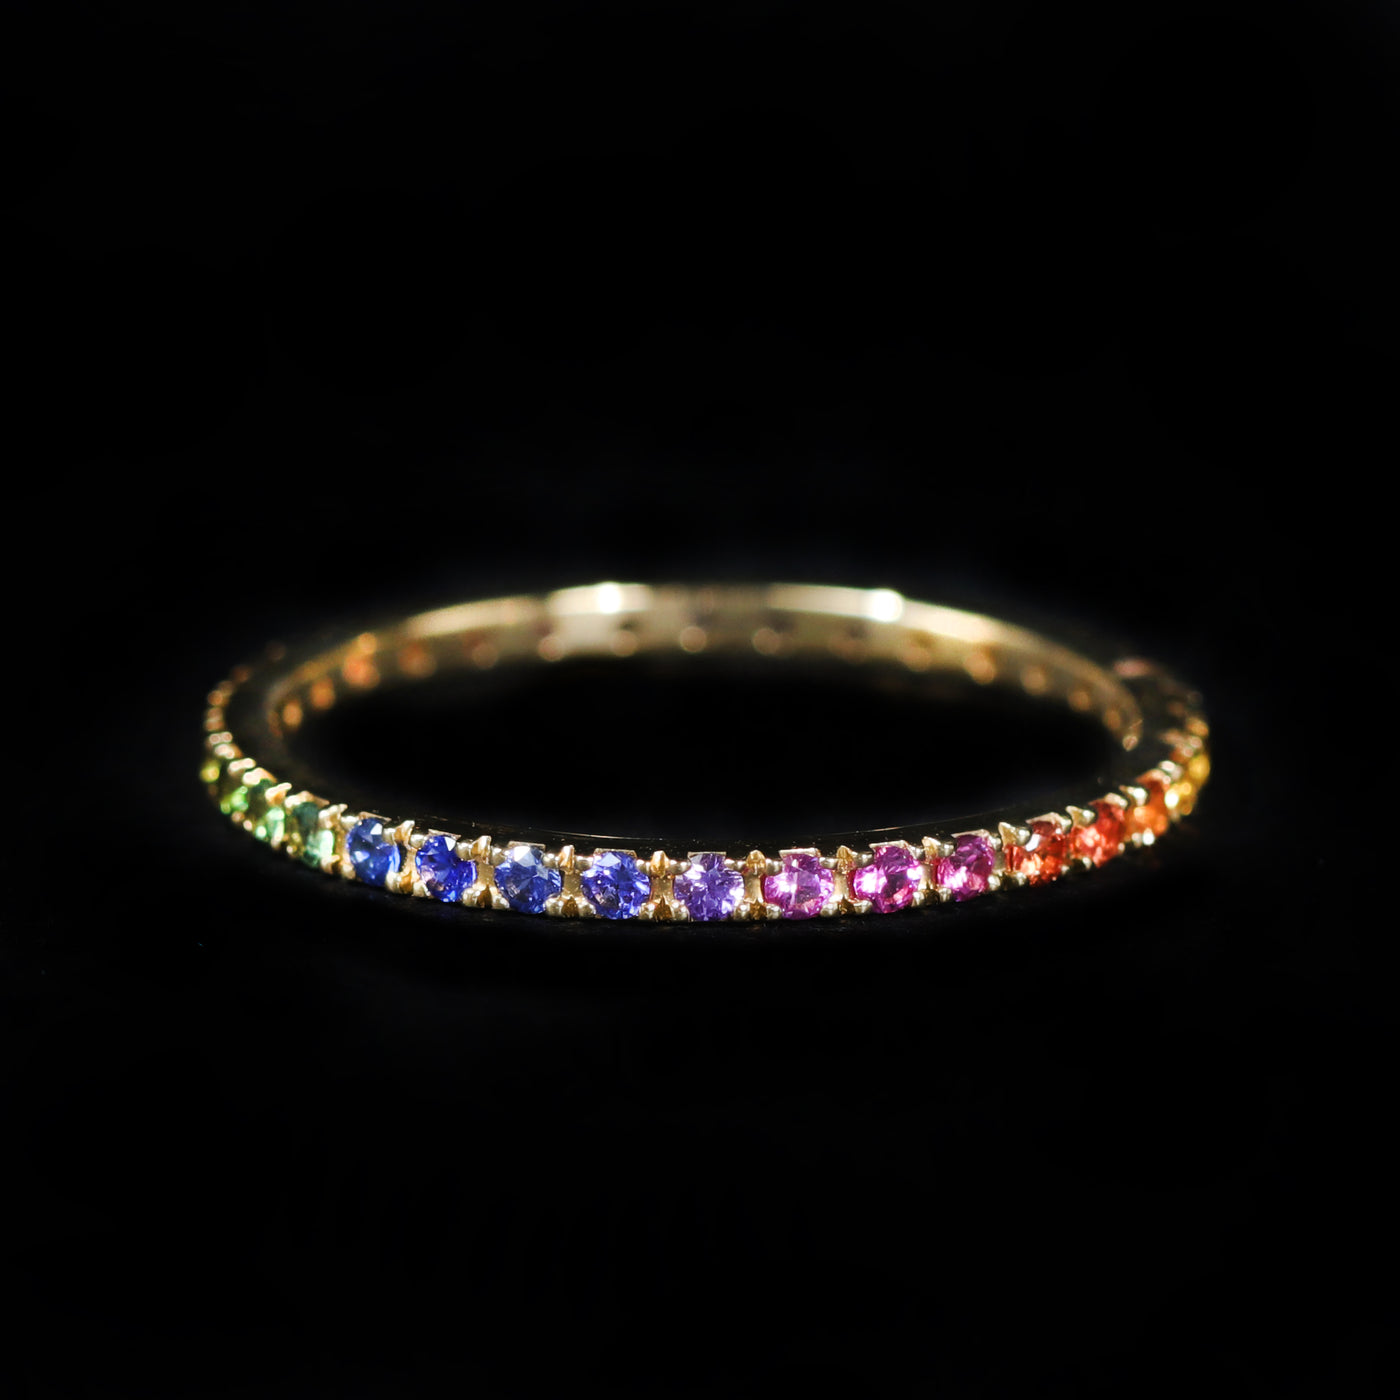 18K Yellow Gold 0.40 CTW Multi-Color Sapphire Band